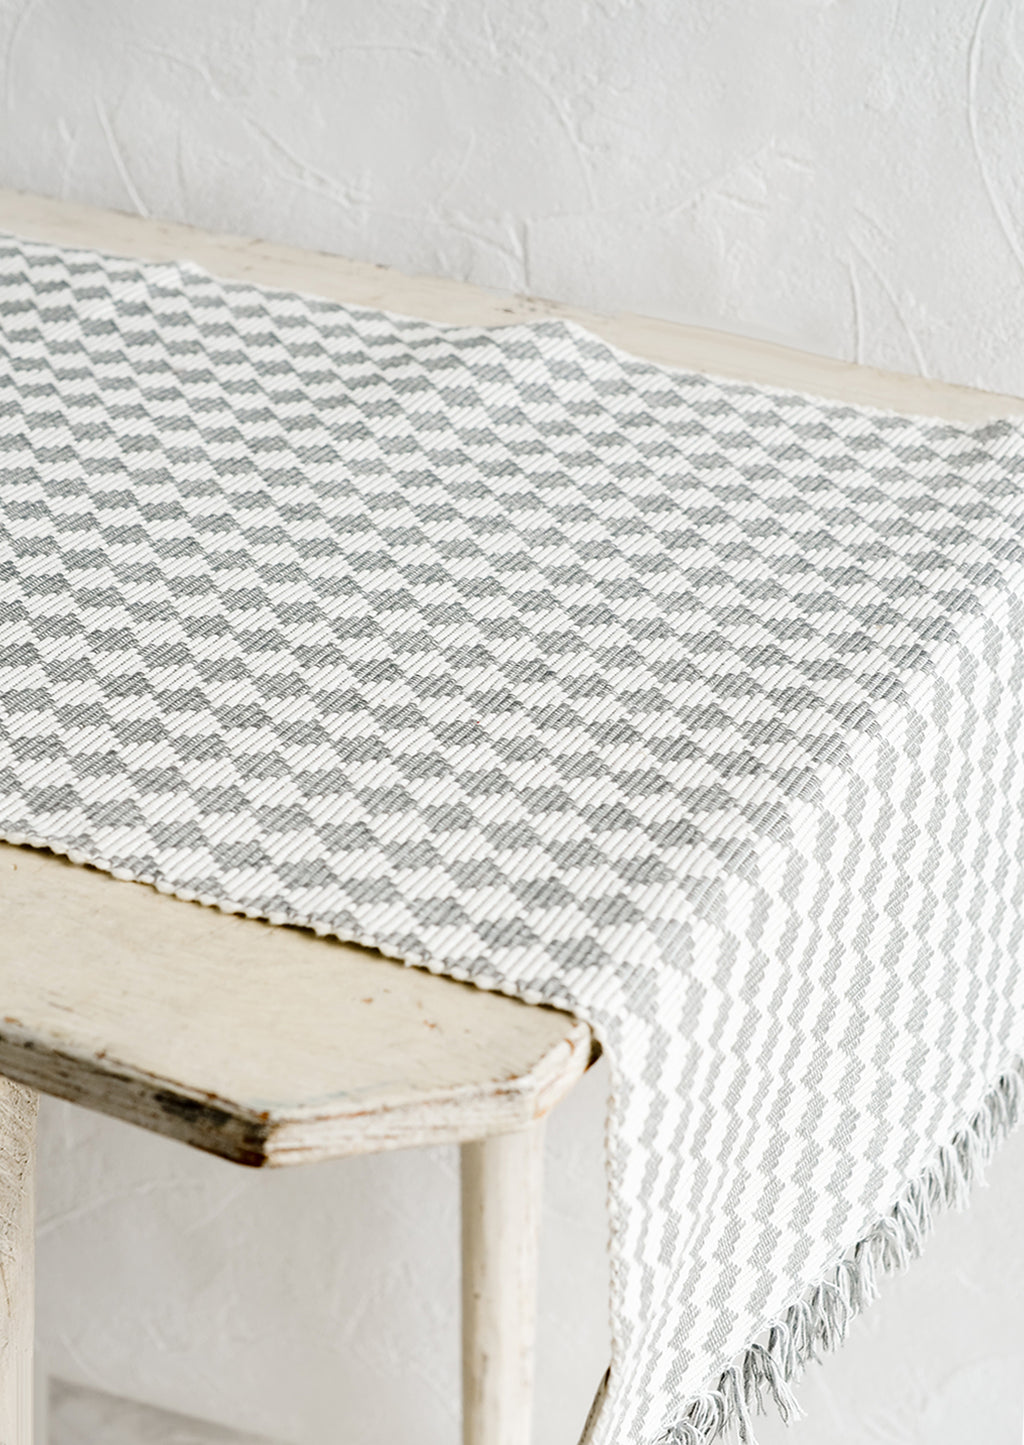 1: A table runner in ribbed textured grey and white checker print.